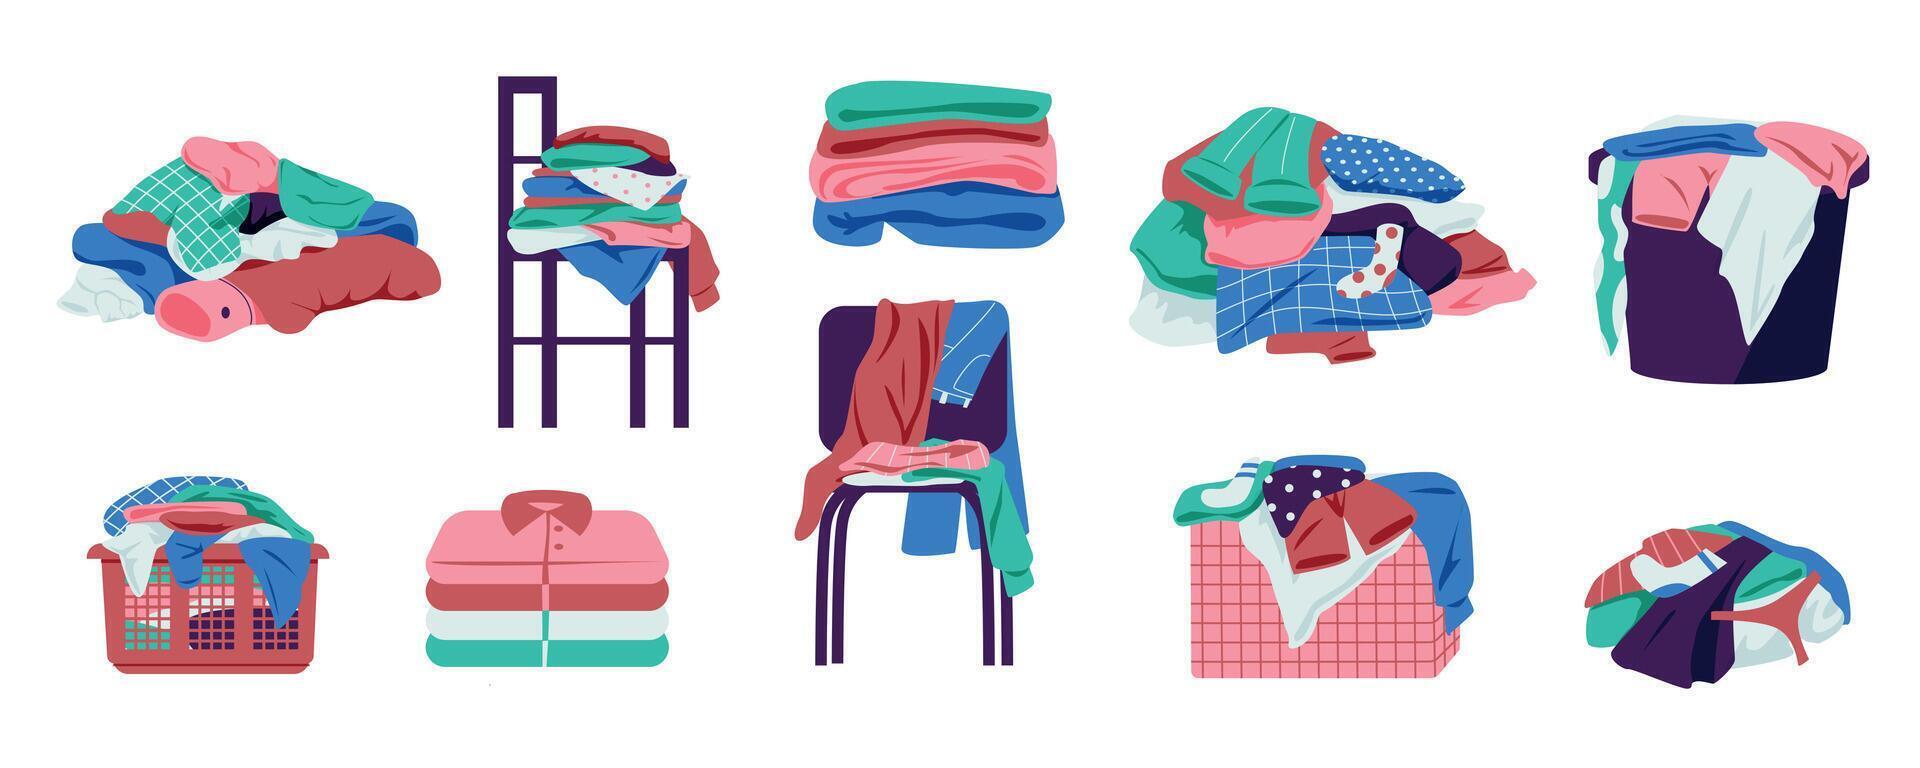 Clothes in piles and stacks. Dirty laundry bundle, messy stacks of clothes, chore of washing and drying. Vector messy laundry illustration